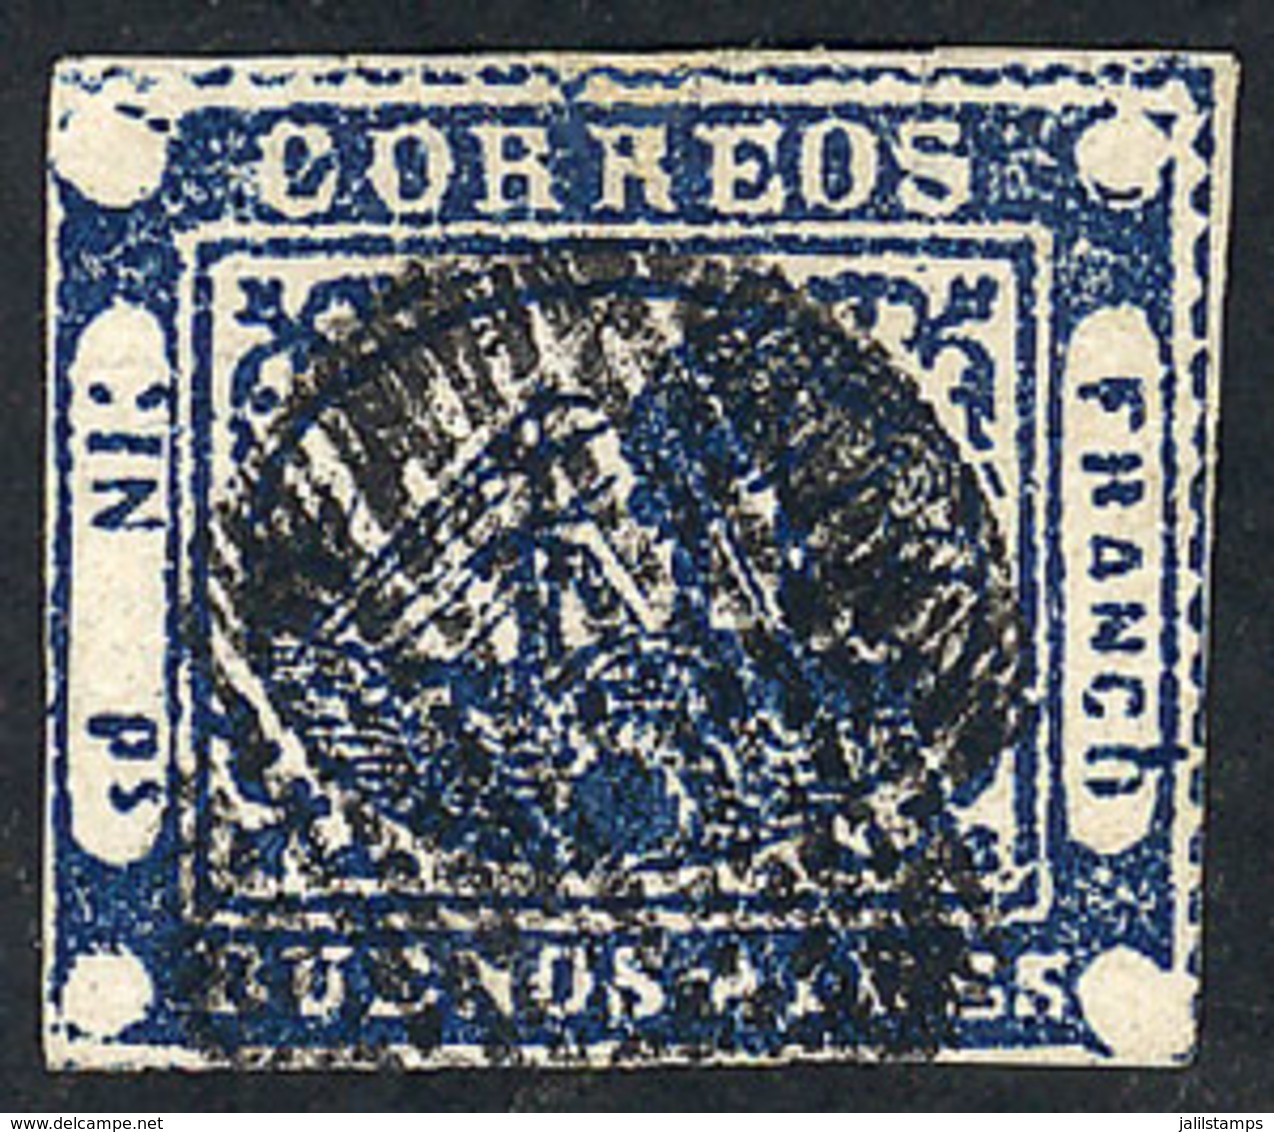 114 ARGENTINA: GJ.11, IN Ps. Blue, Type 39, WITH VARIETY: Large Ink Spot Below The Ship, - Buenos Aires (1858-1864)